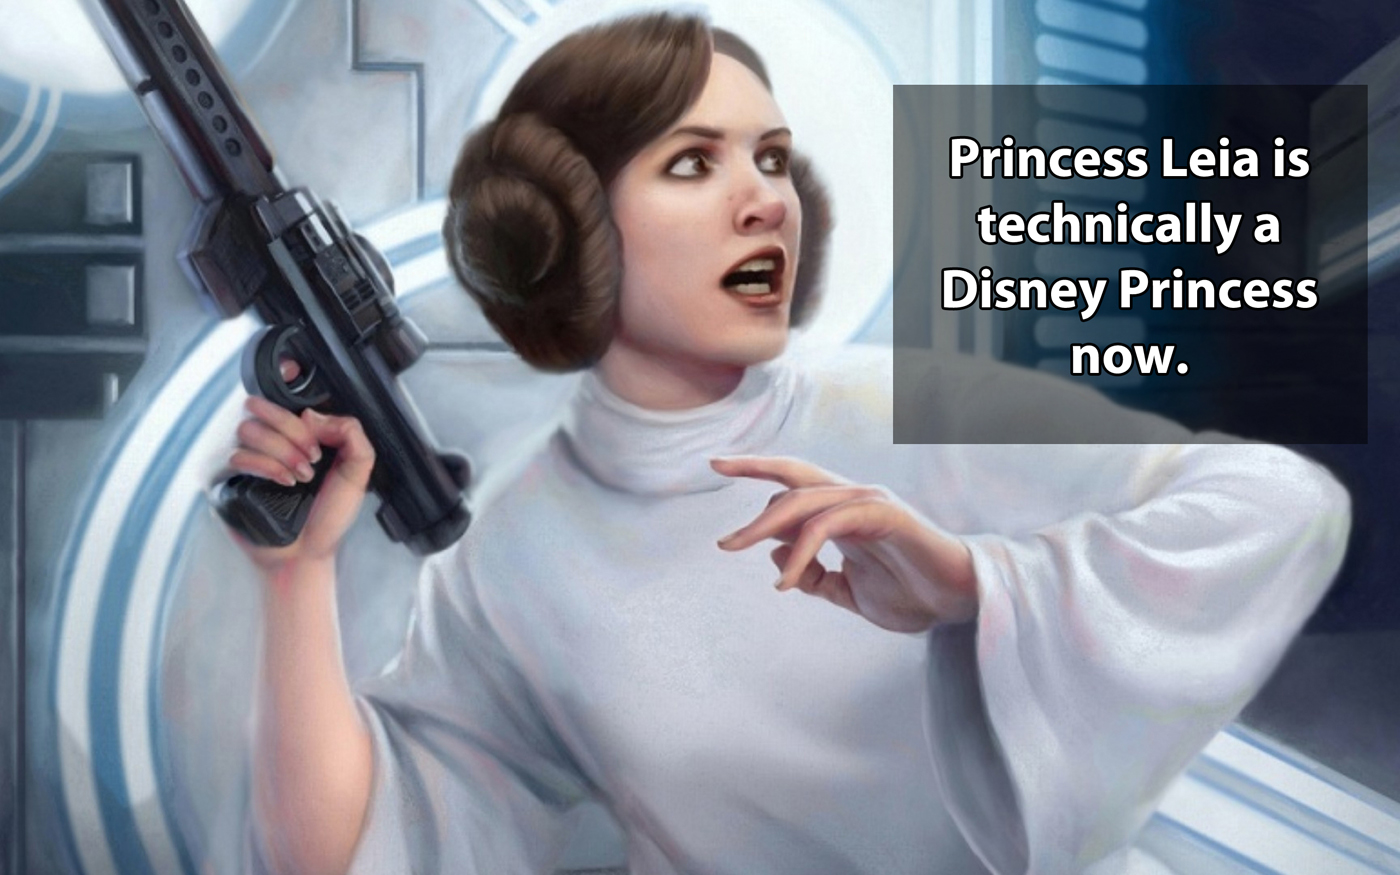 fate accelerated characters - Princess Leia is technically a Disney Princess now.